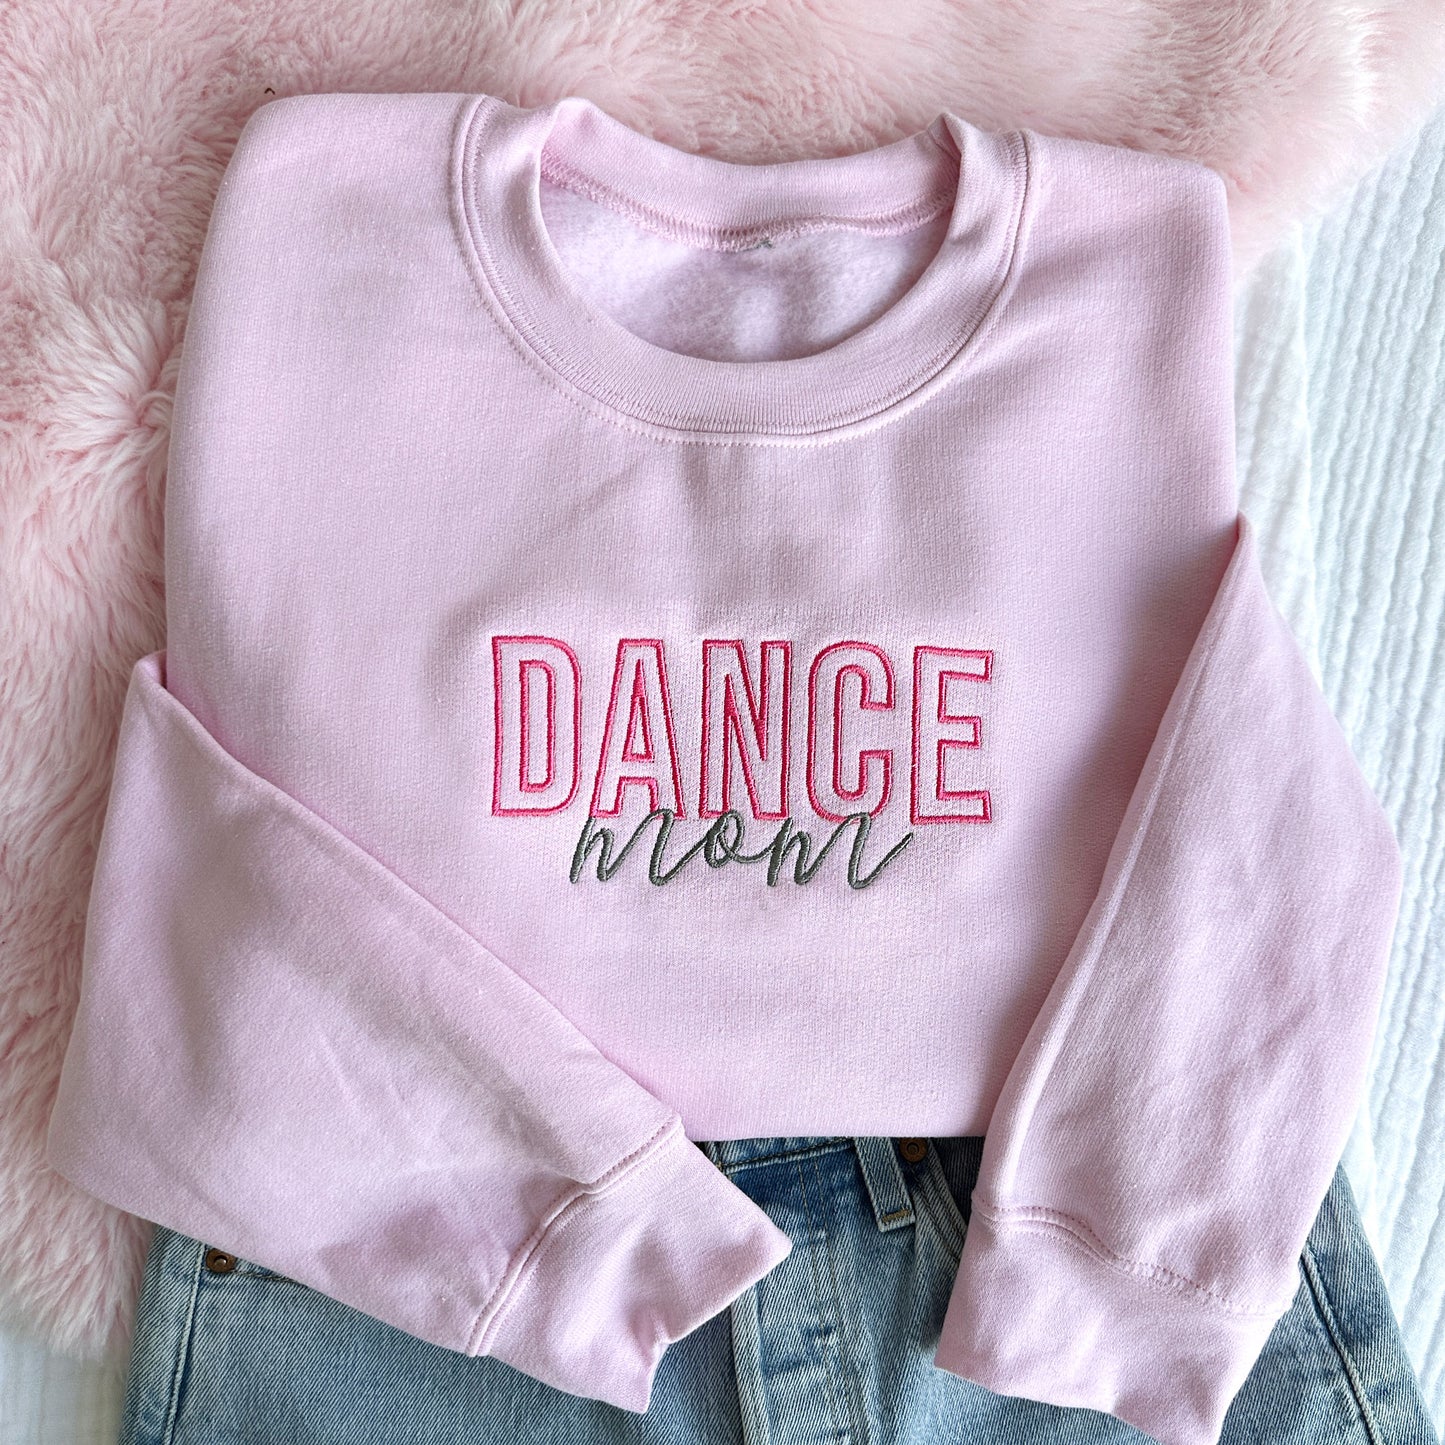 Light Pink crewneck sweatshirt with embroidered dance mom design in pink and grey threads